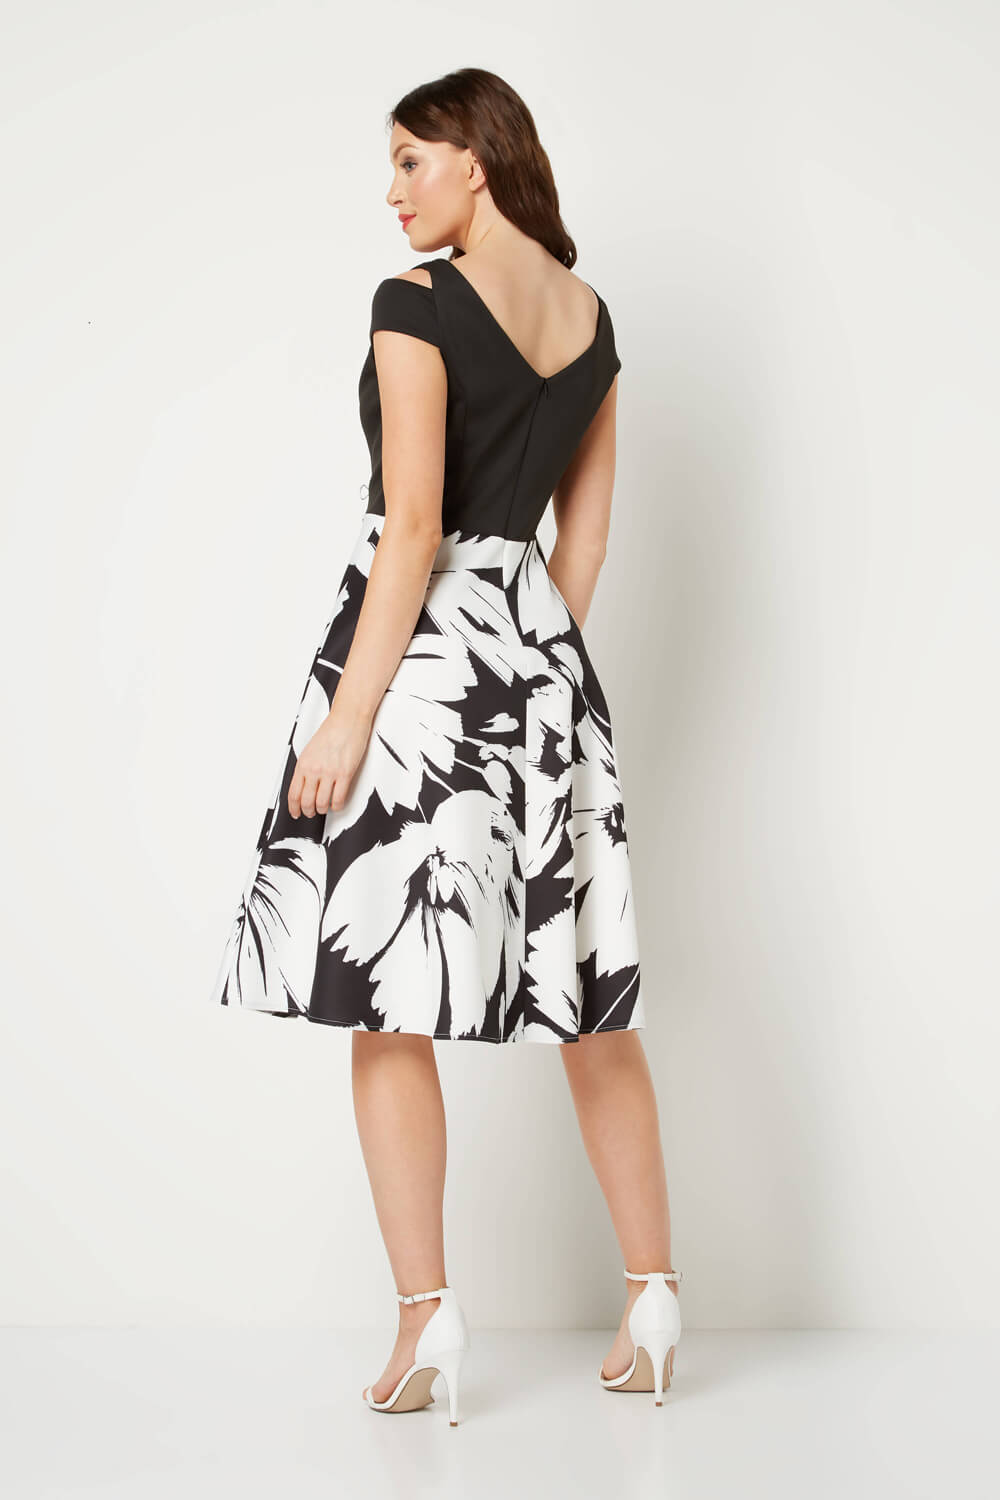 Black Fit and Flare Floral Scuba Dress, Image 2 of 3